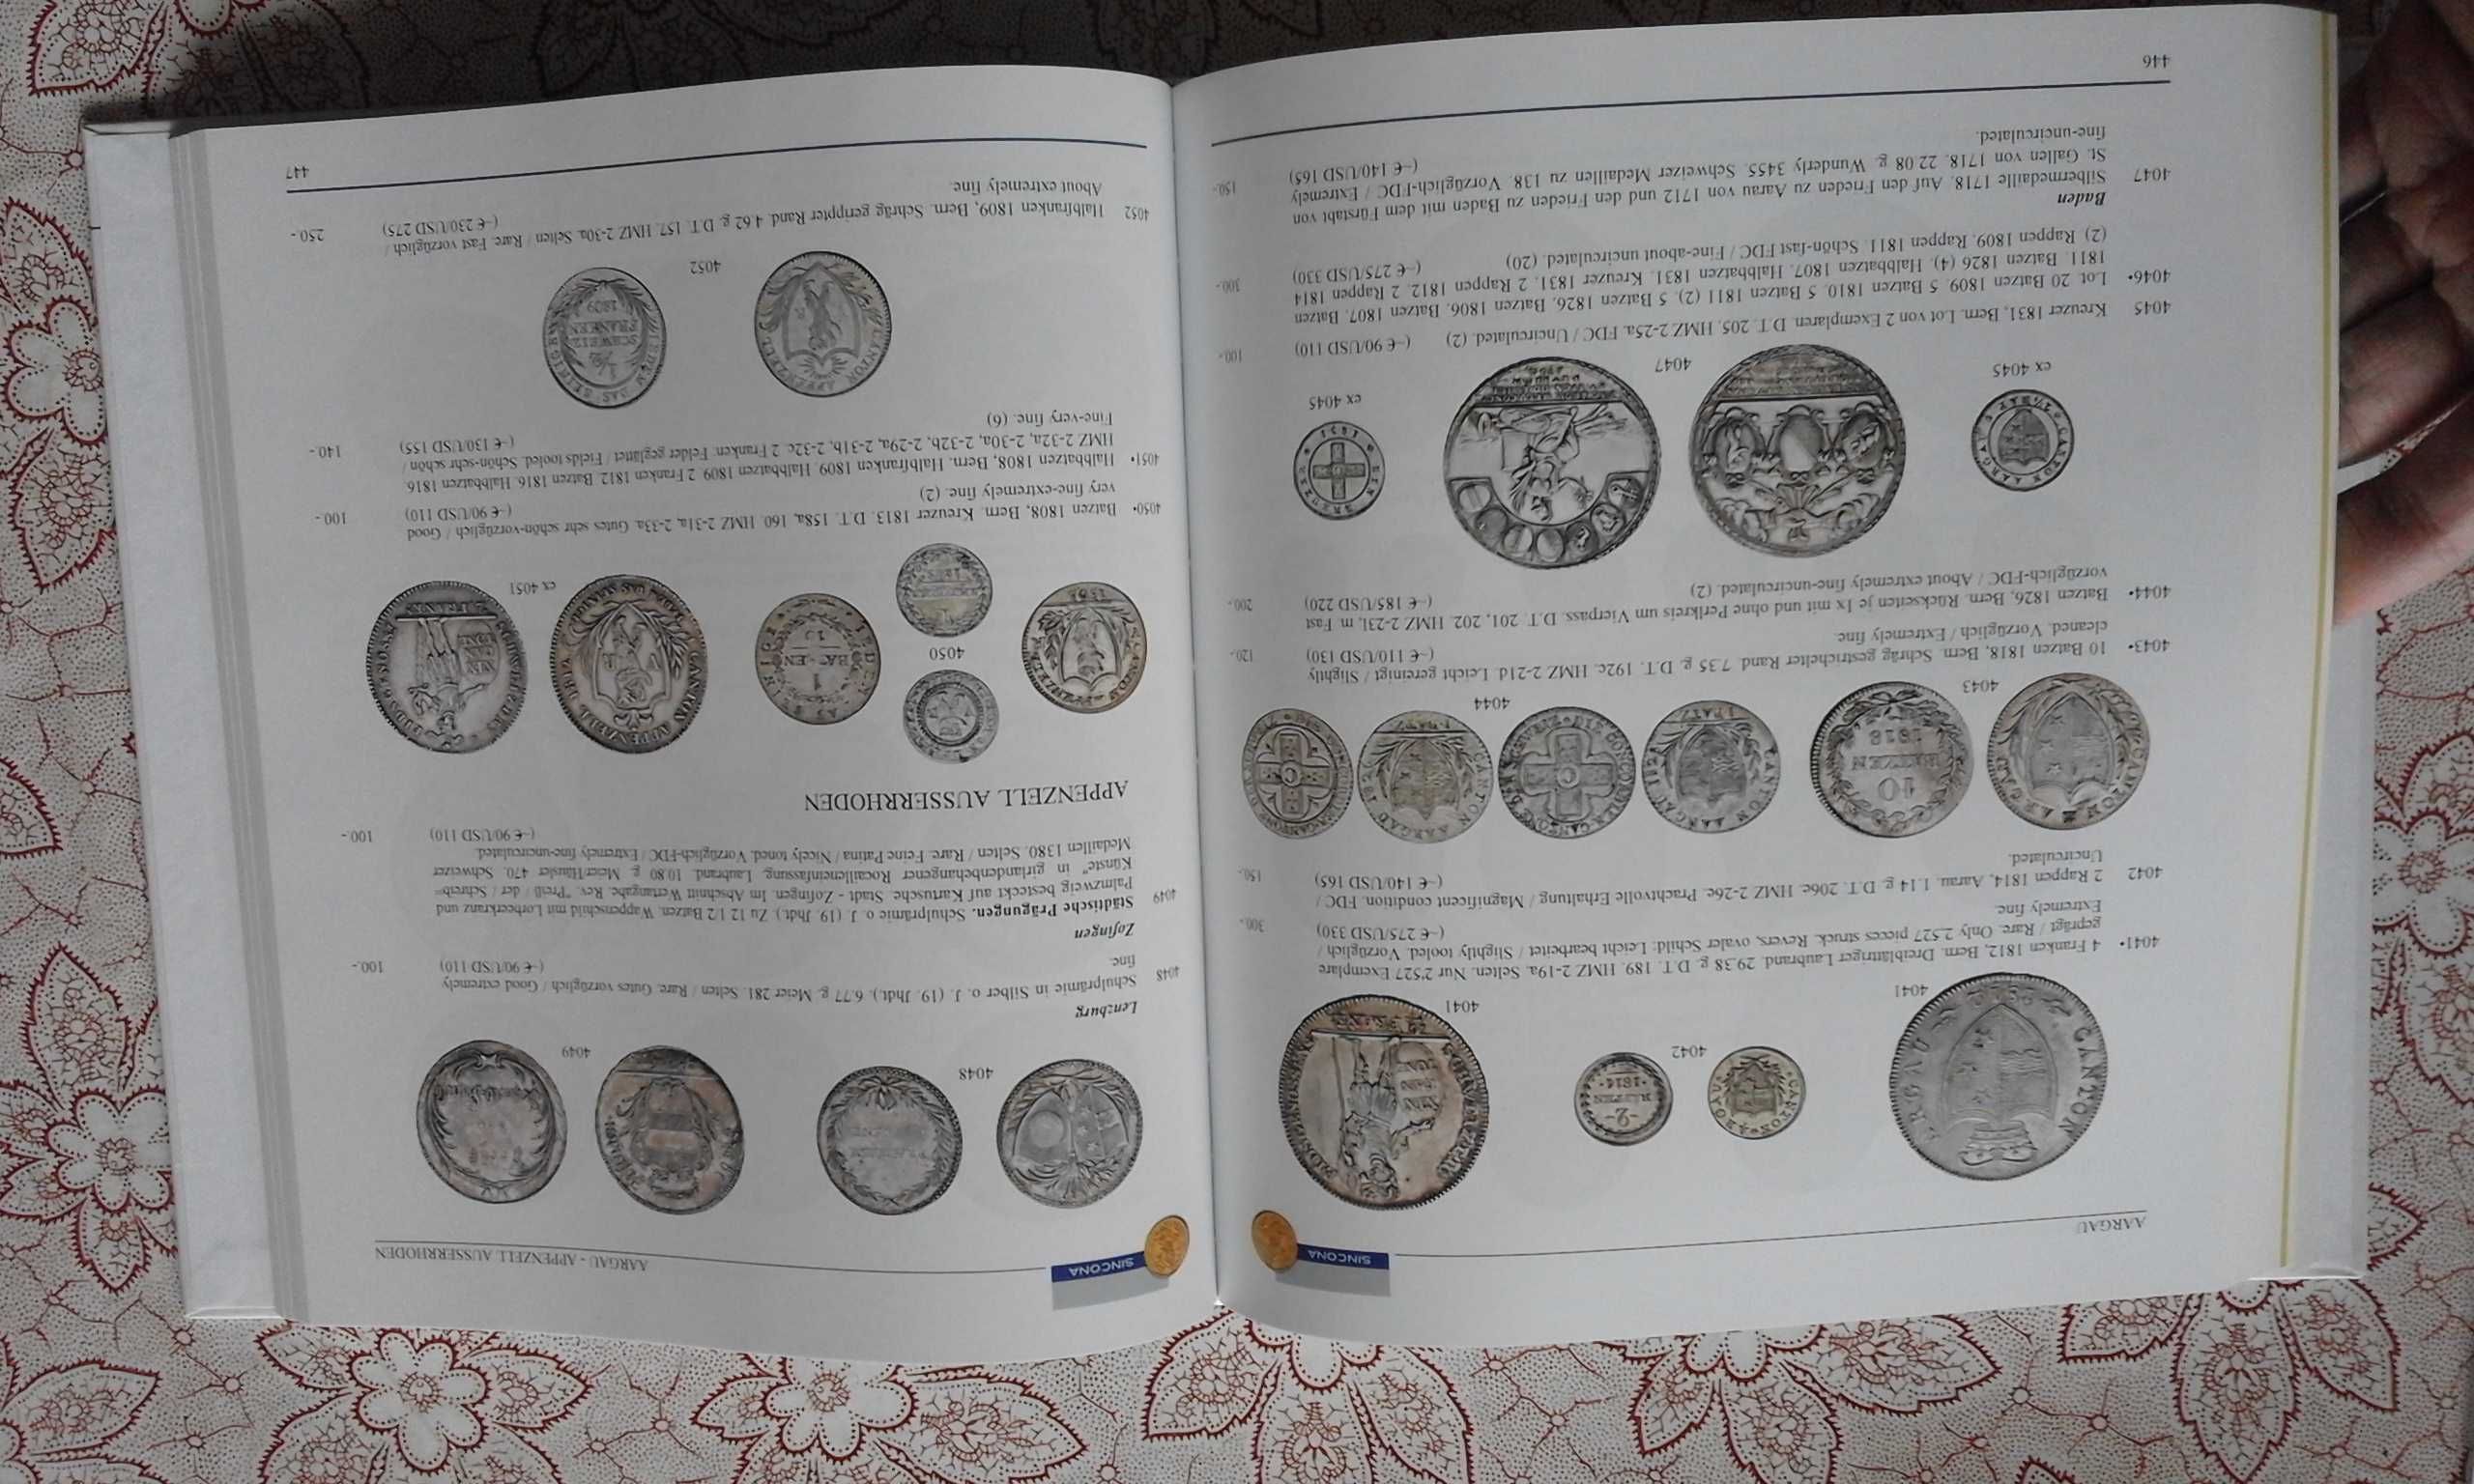 SICONIA Auction 73: World Coins and Medals; Banknotes / 22-23 N. 2021